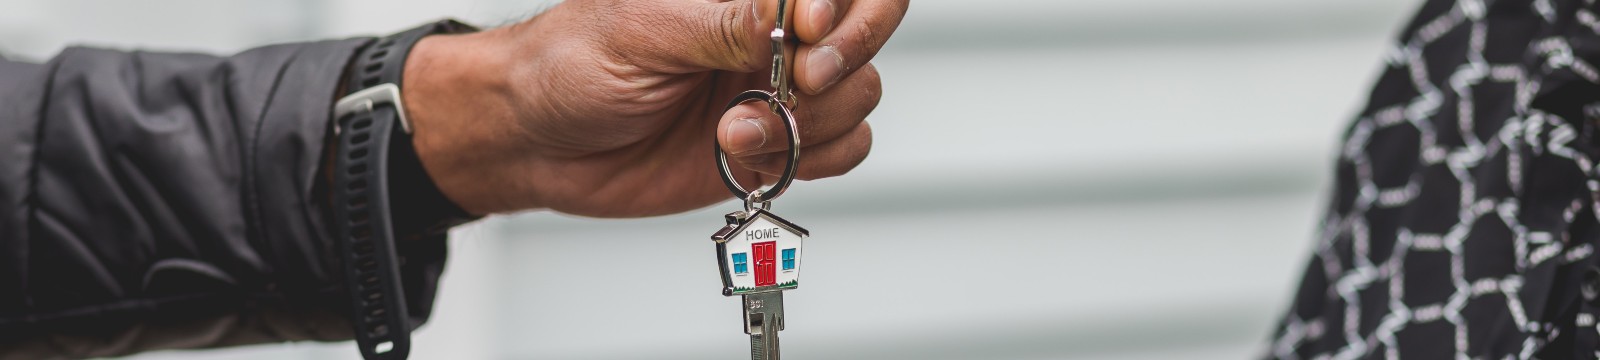 person holding house key